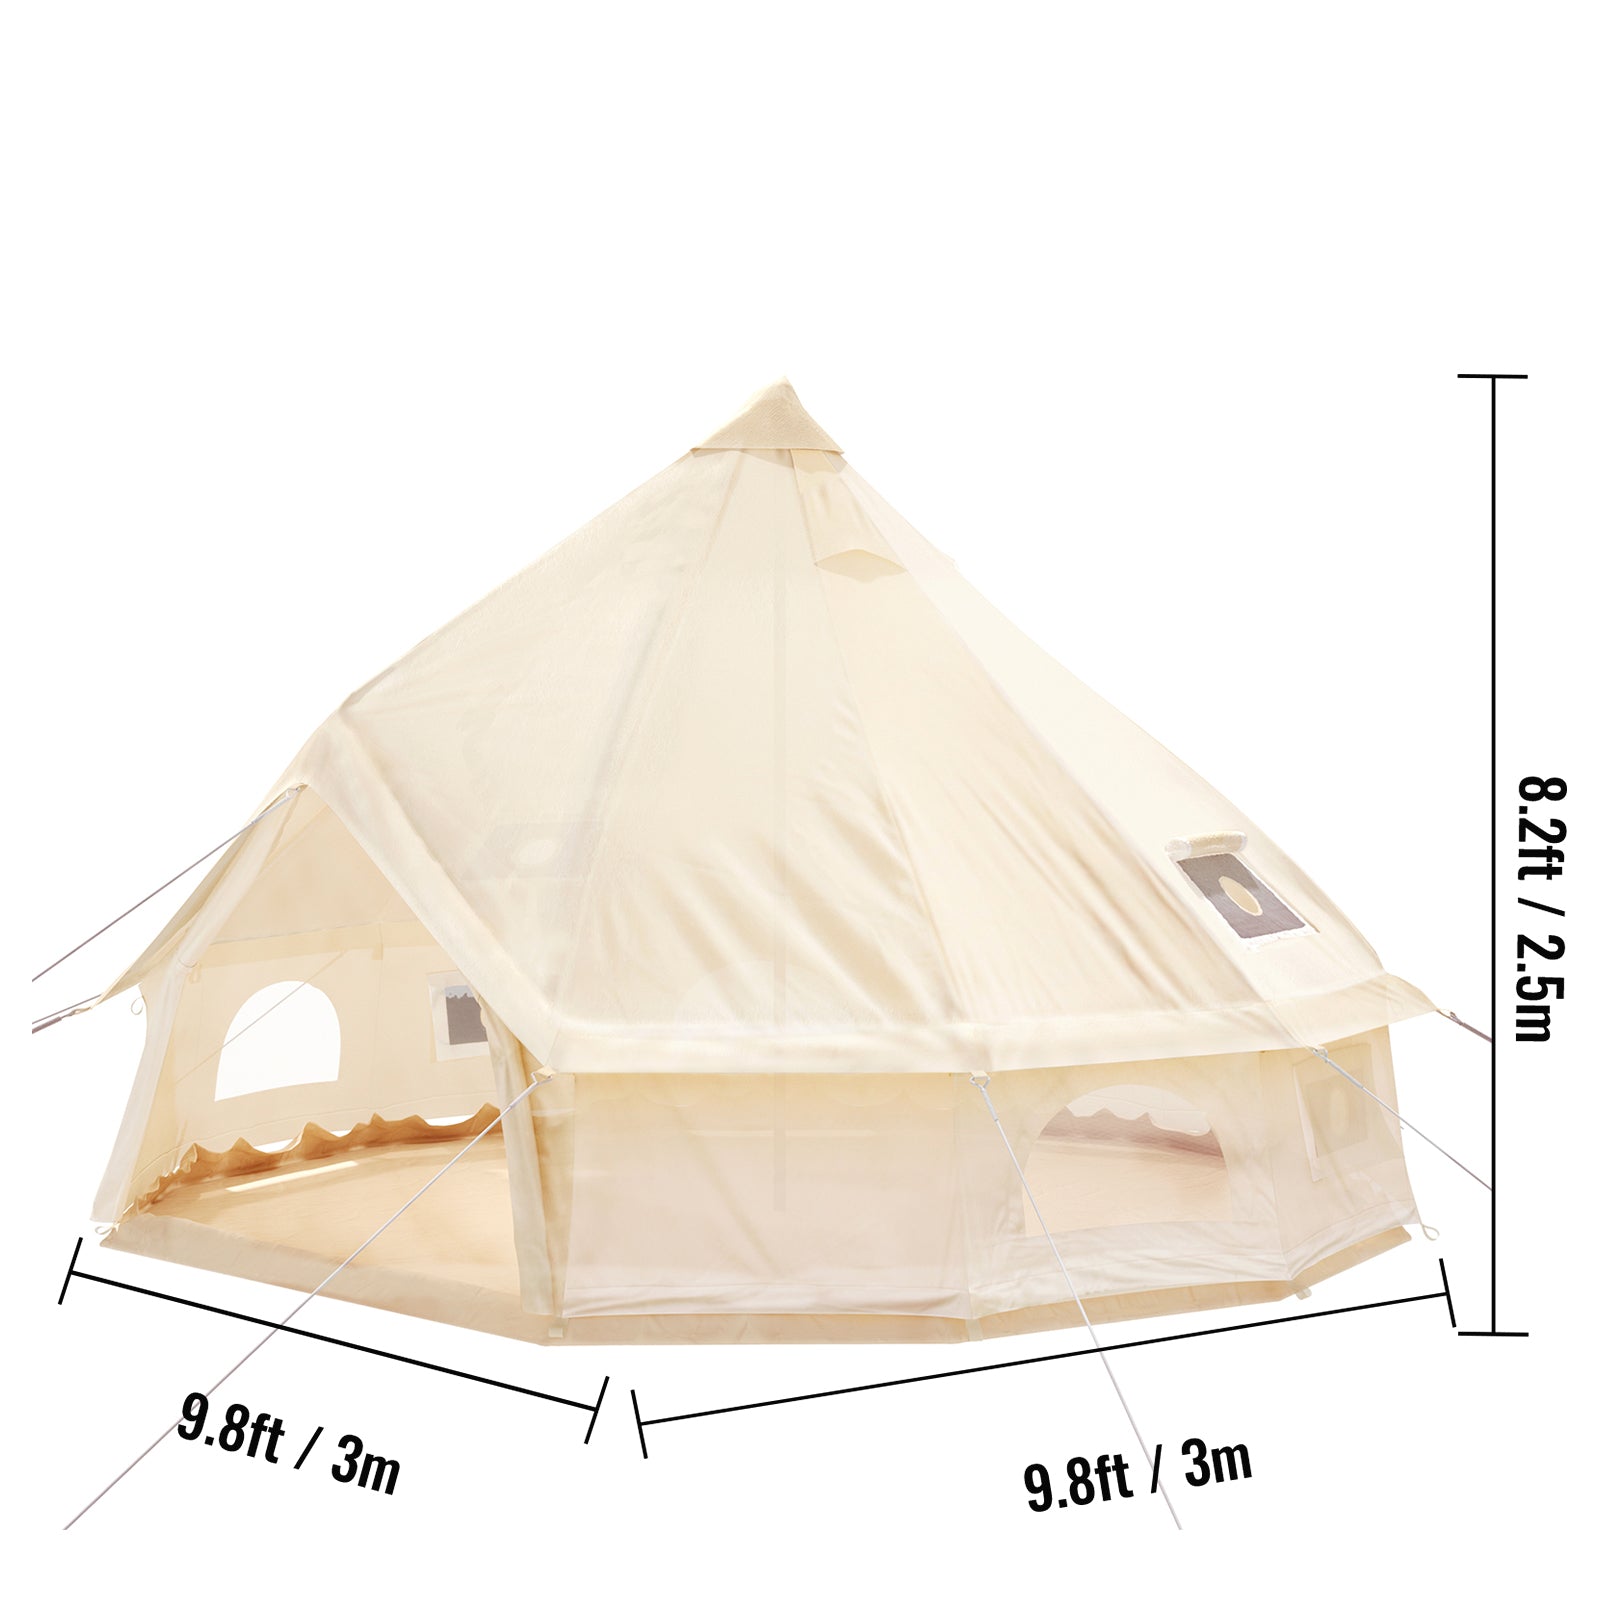 VEVORbrand Canvas Bell Tent 9.84ft Cotton Canvas Tent with Wall Stove Jacket Glamping Tent Waterproof Bell Tent for Family Camping Outdoor Hunting in 4 Seasons